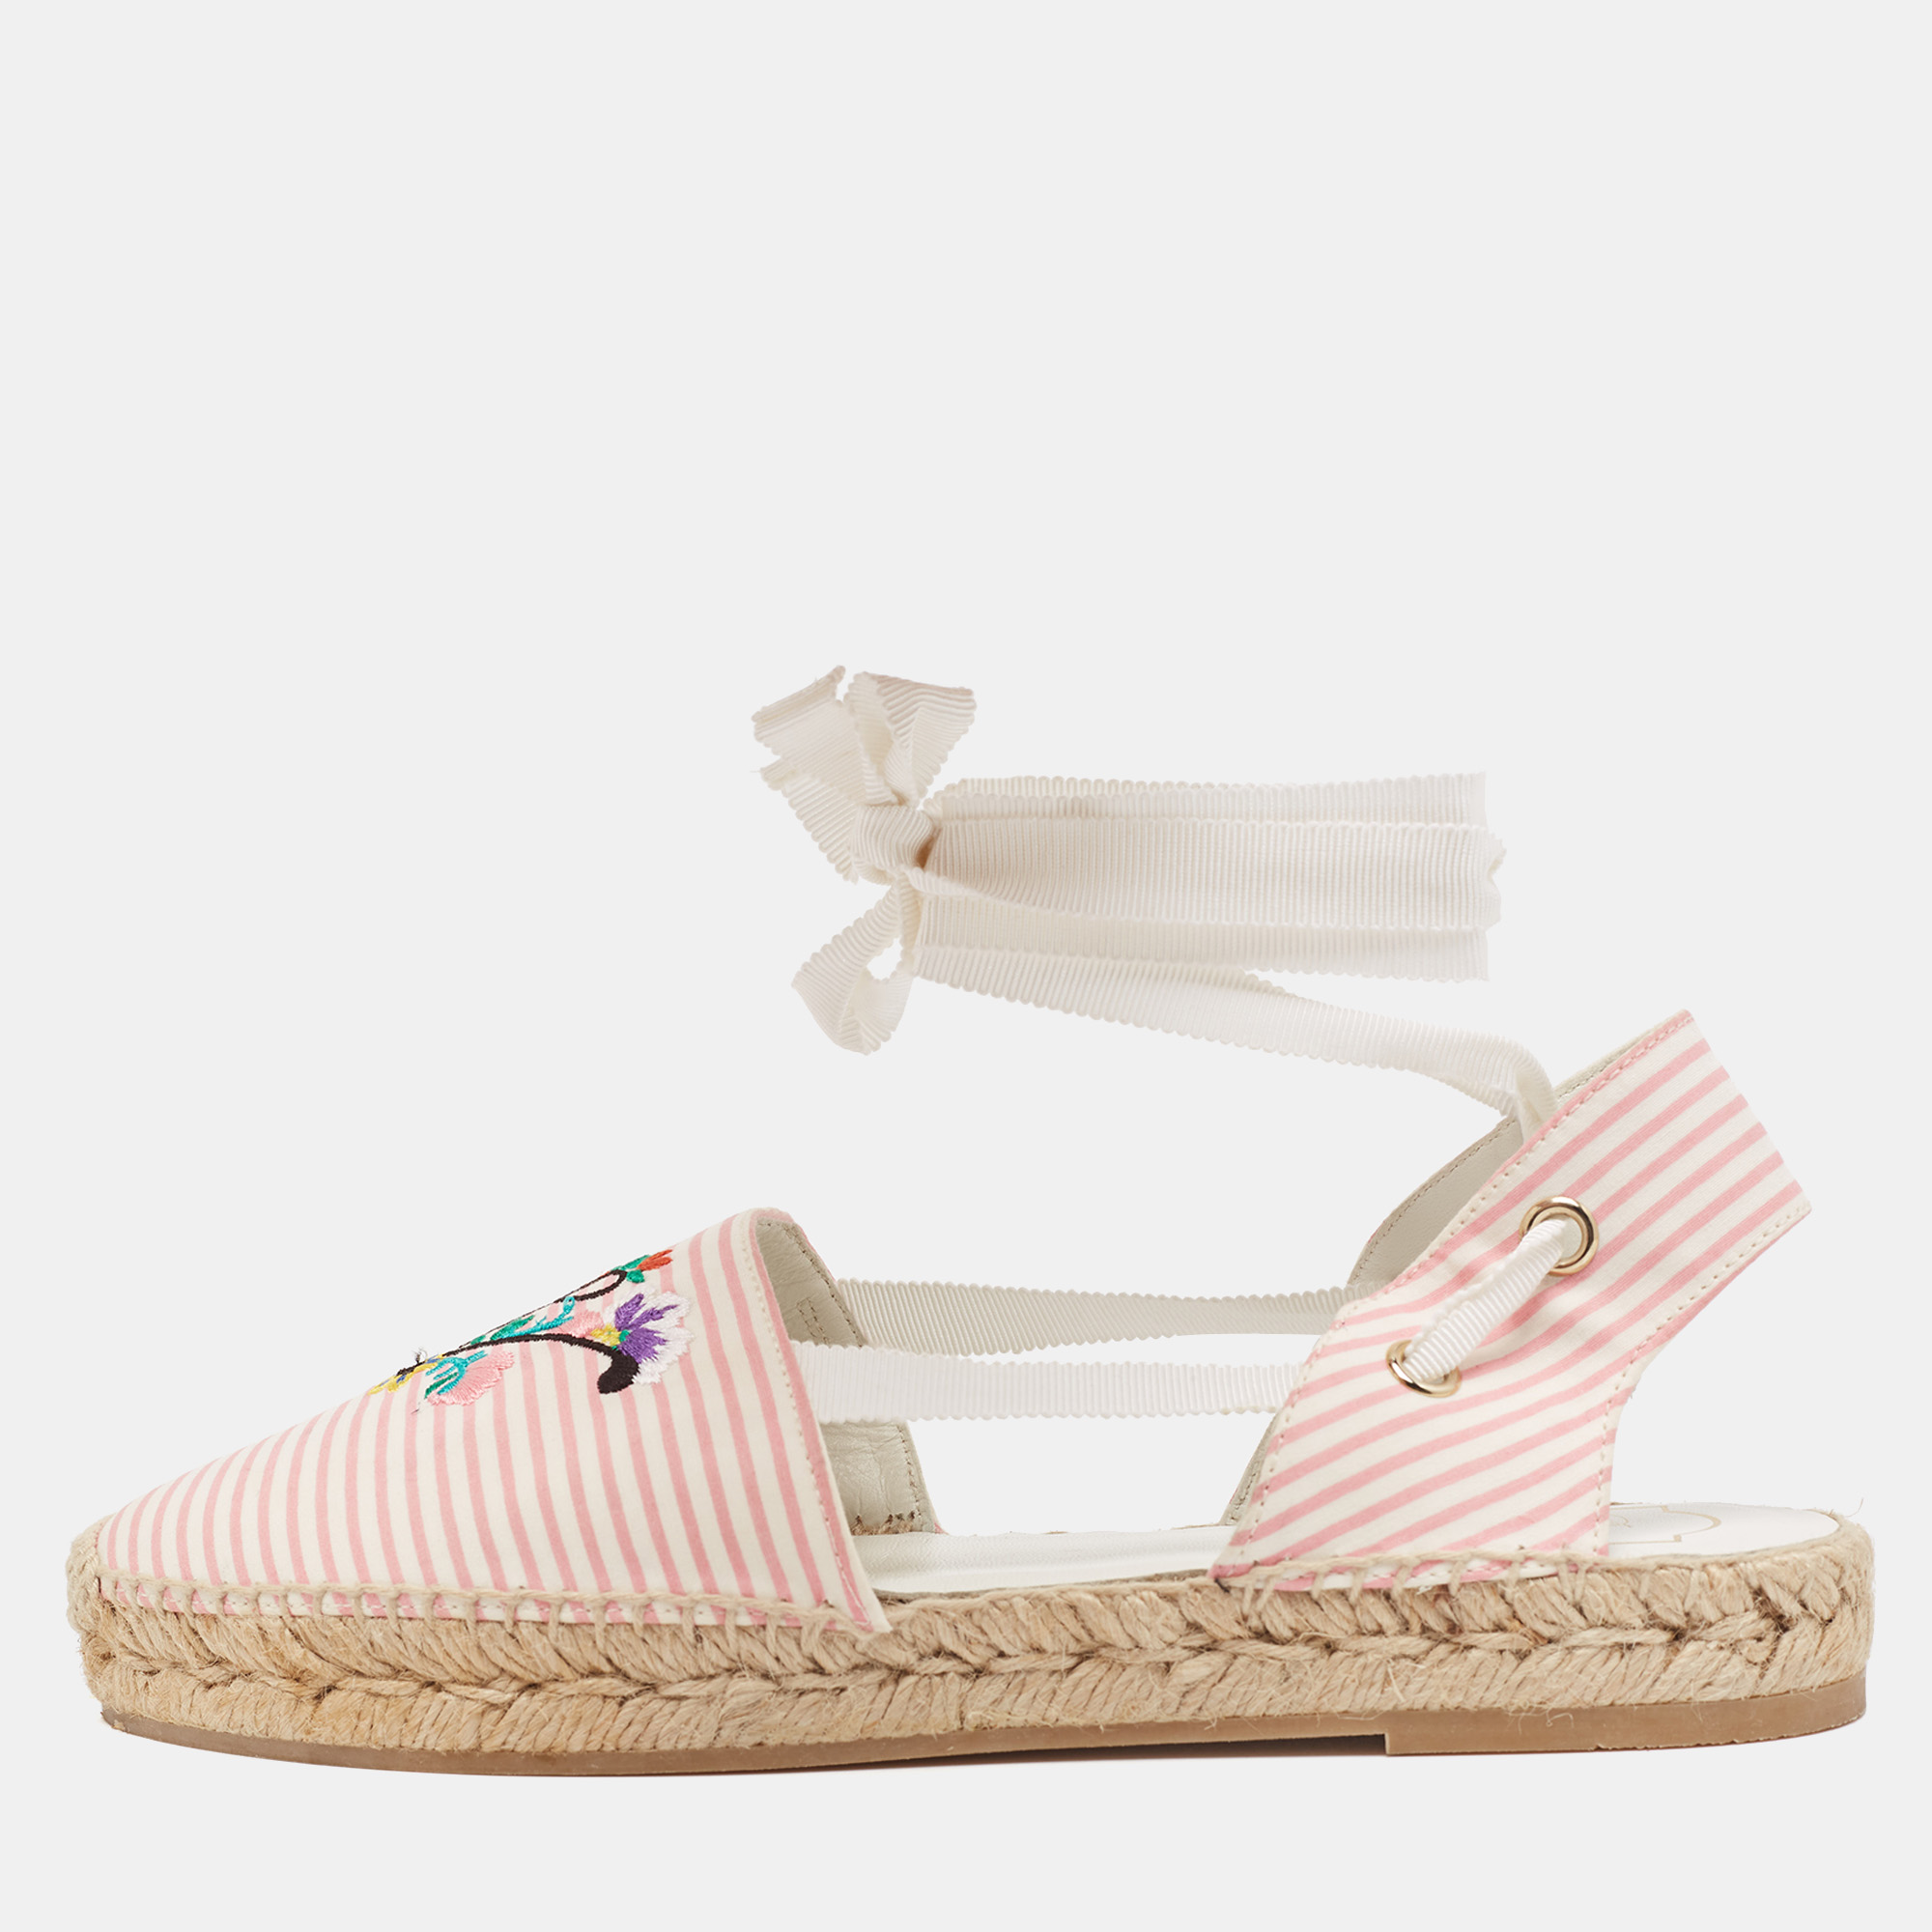 Roger vivier pink/white stripe fabric embroidered ankle wrap espadrilles flats size 40